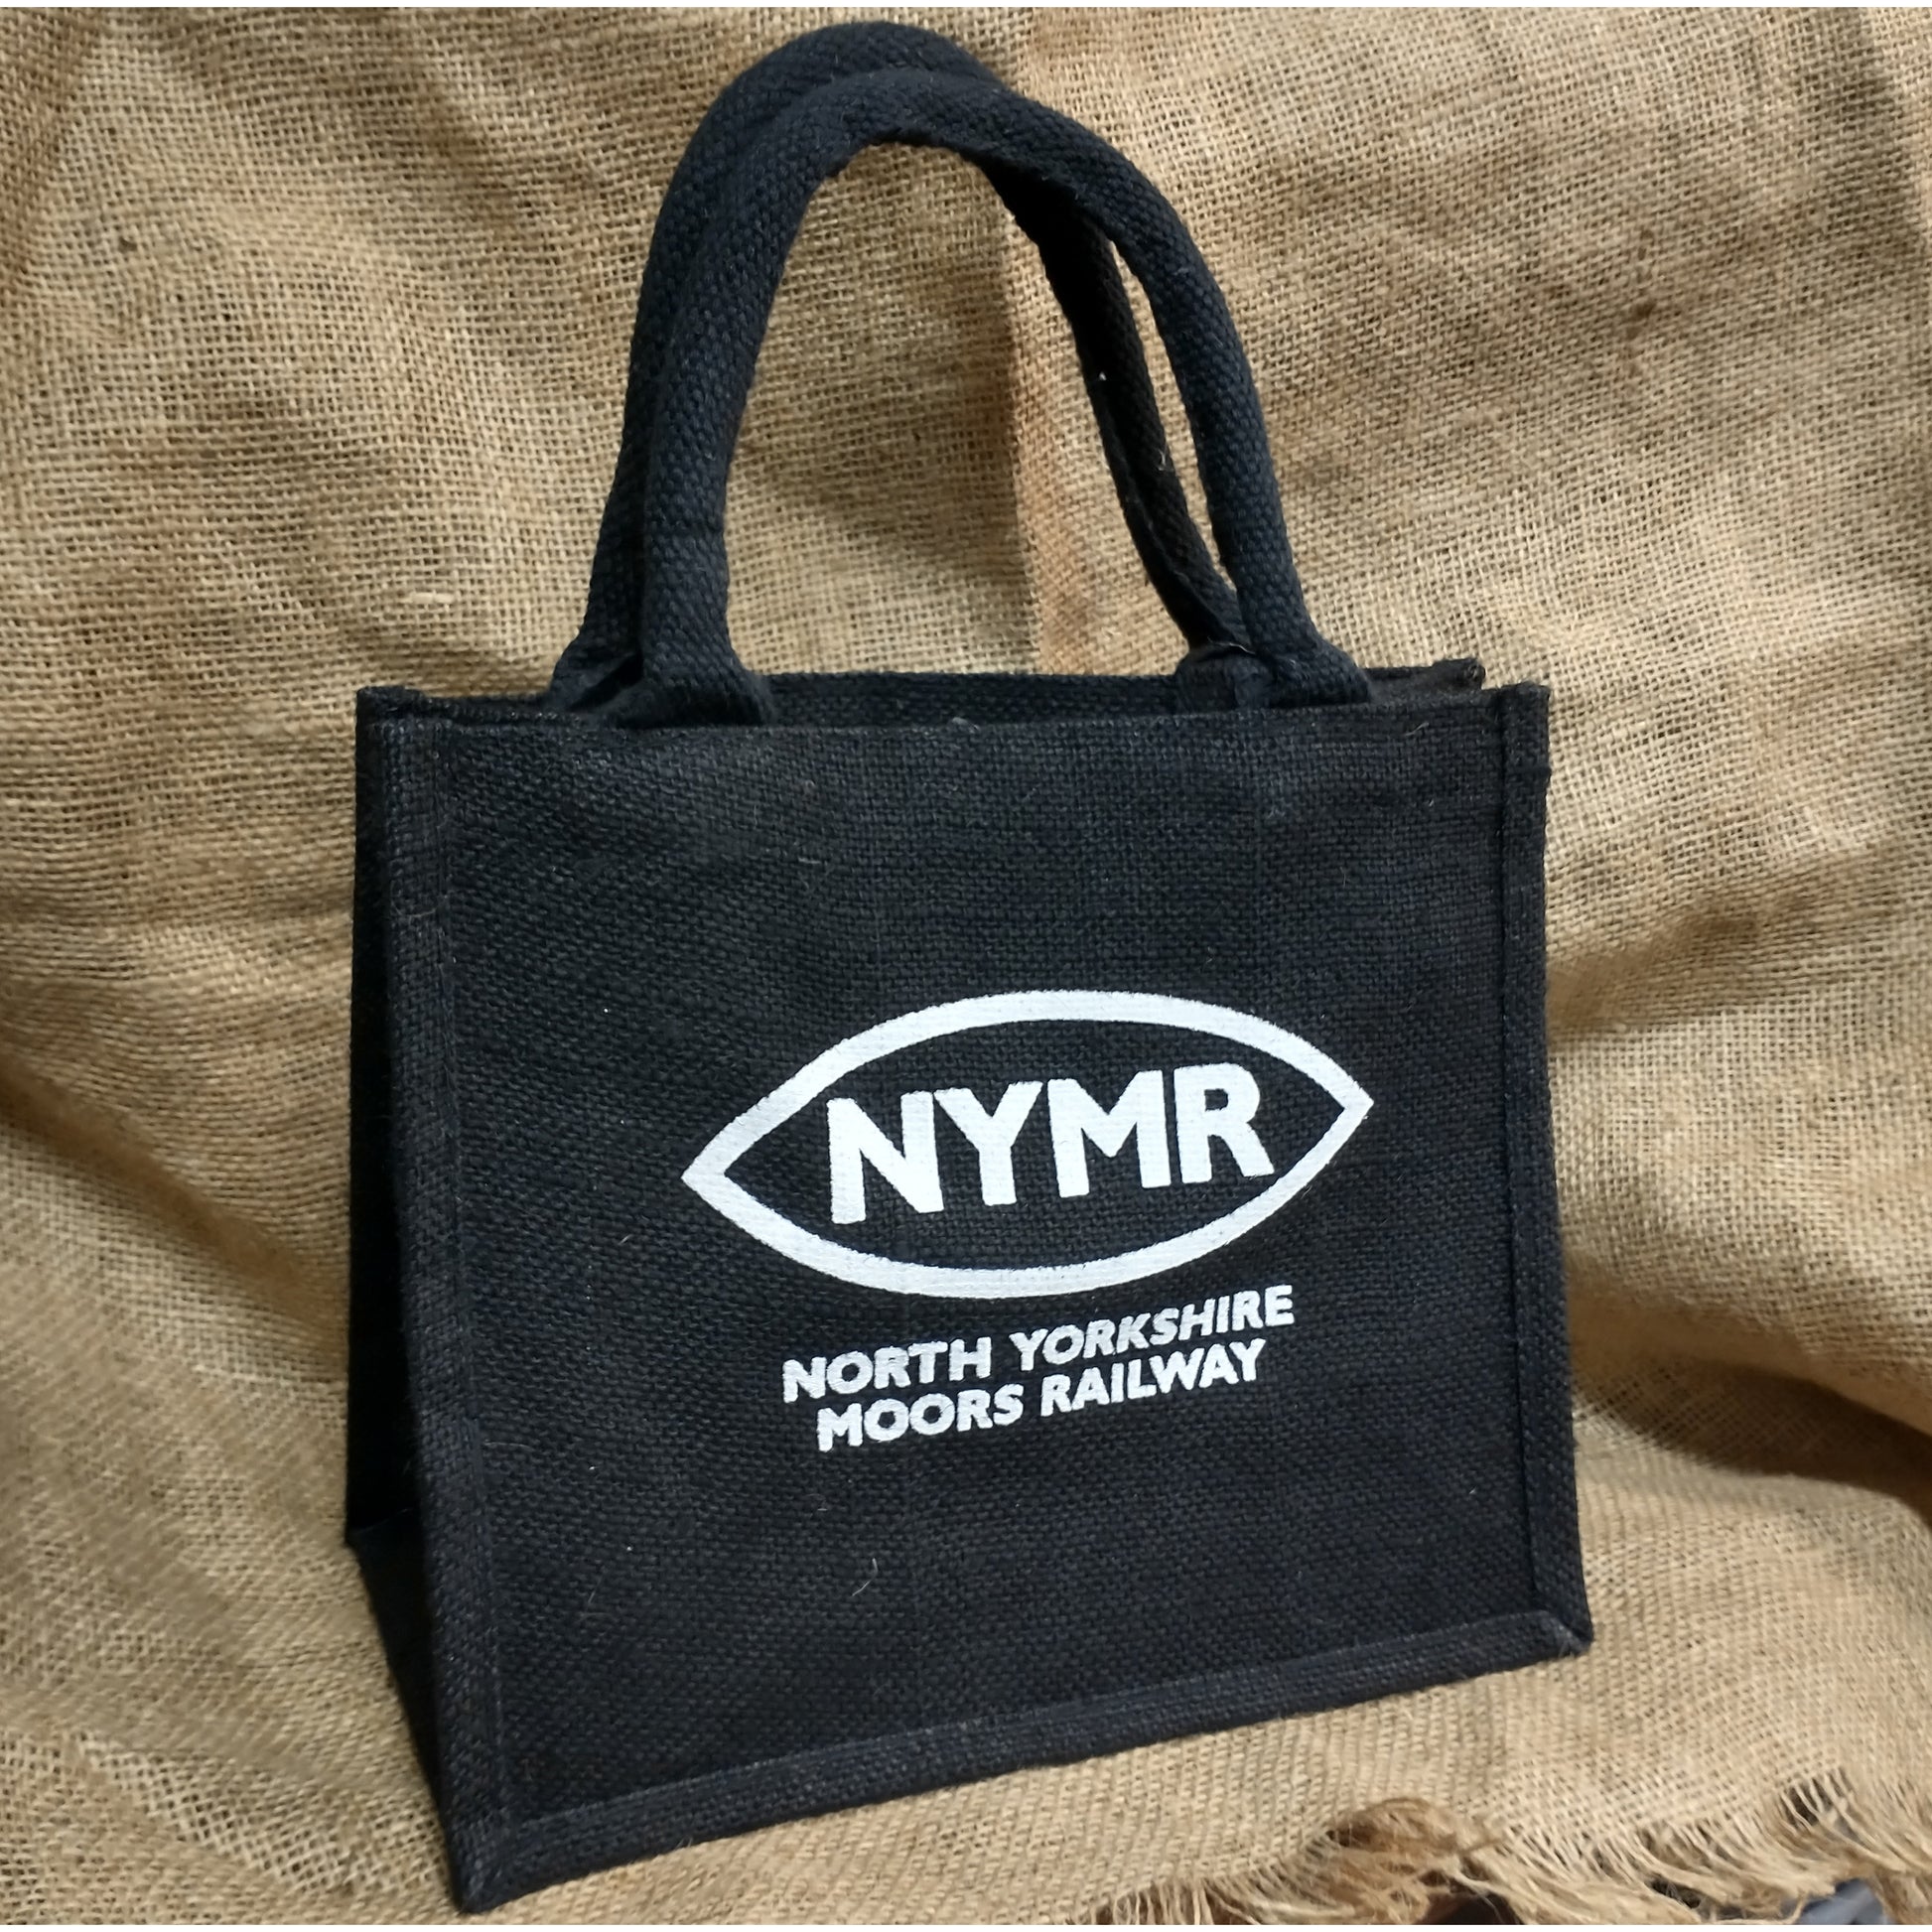 A black jute bag with the NYMR logo printed in white. Good strong handles too.